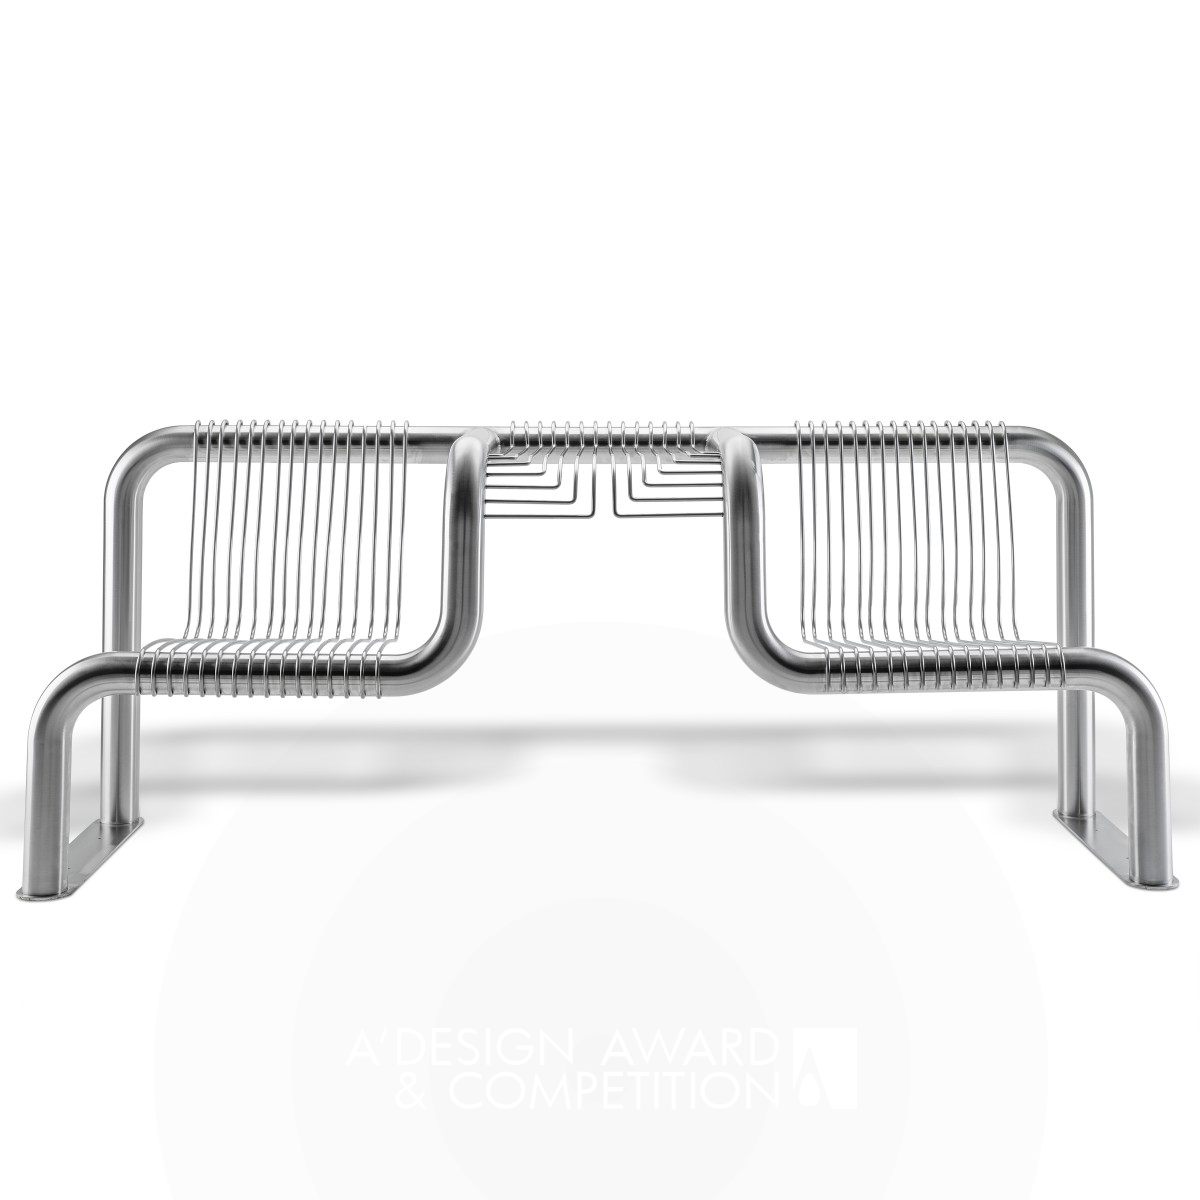 Bench for BLM Group <b>Outdoor seating